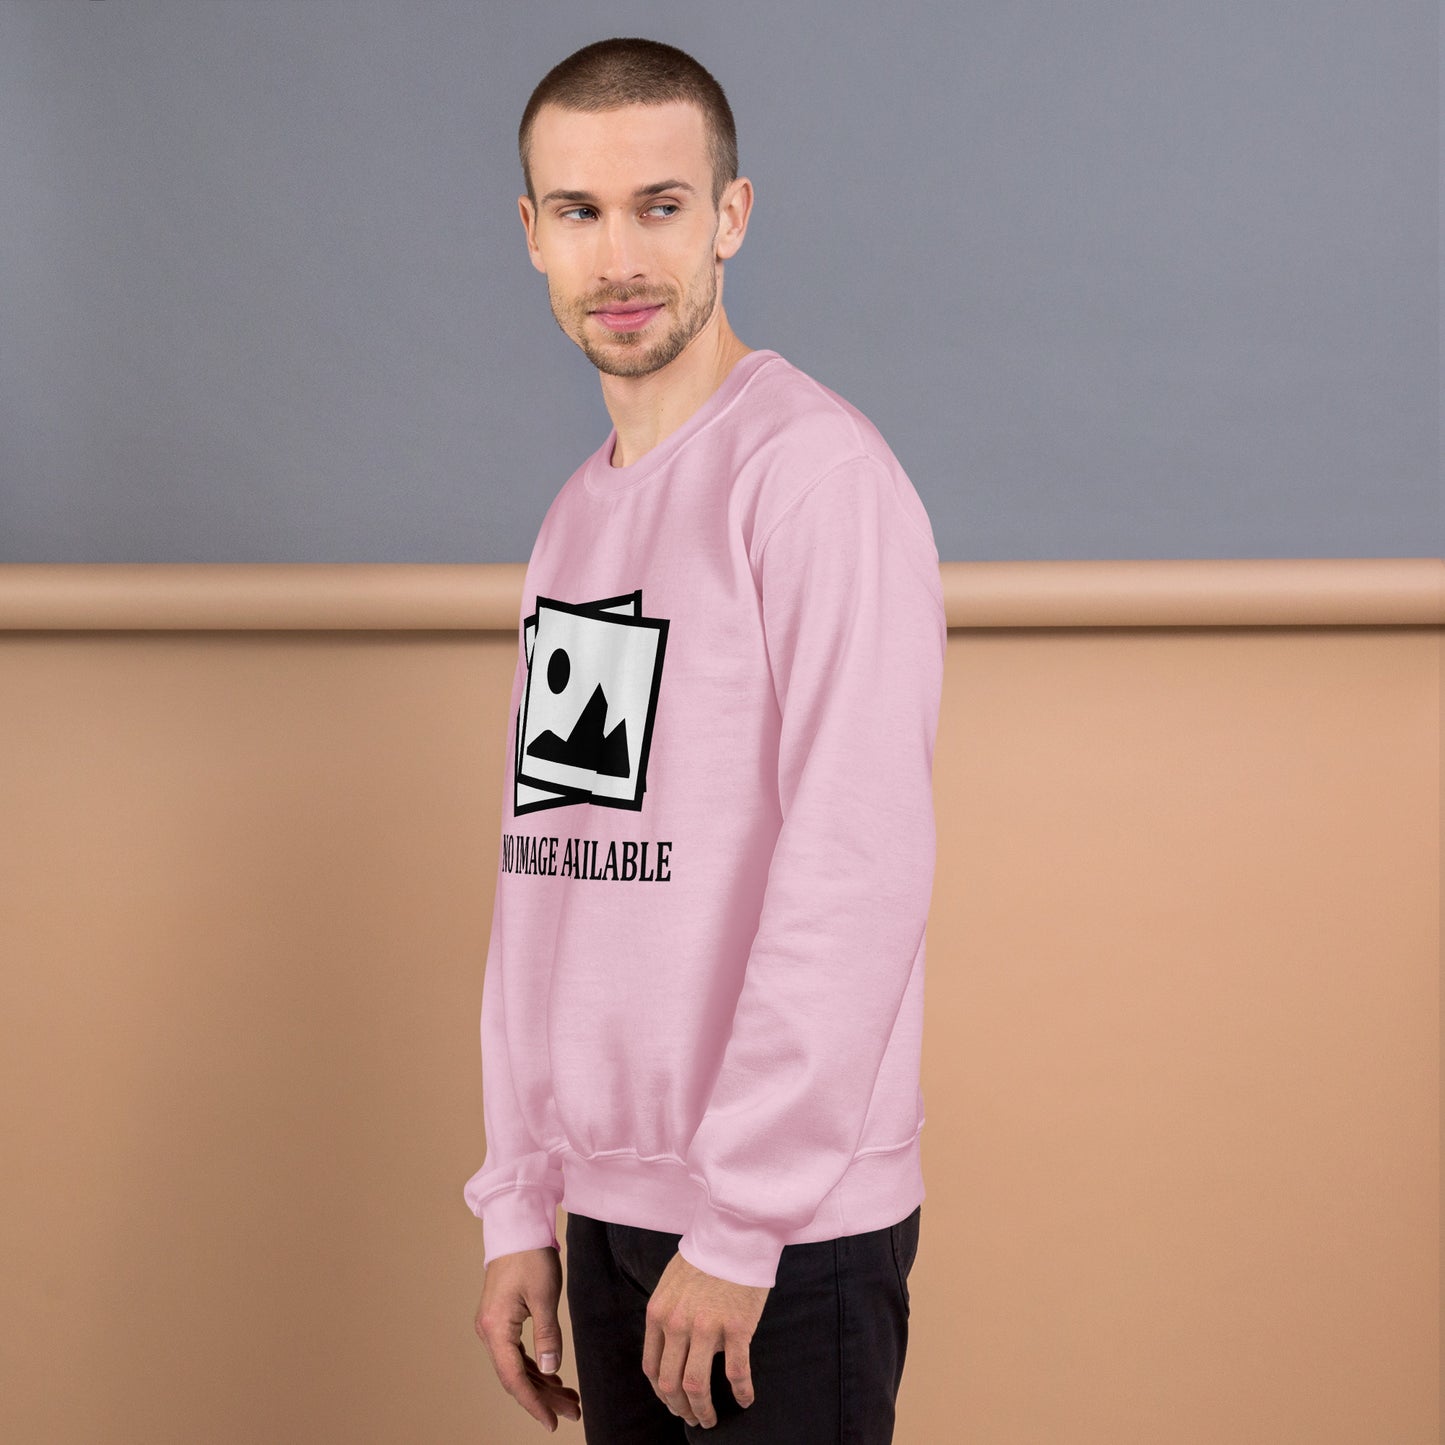 Men with pink sweatshirt with image and text "no image available"